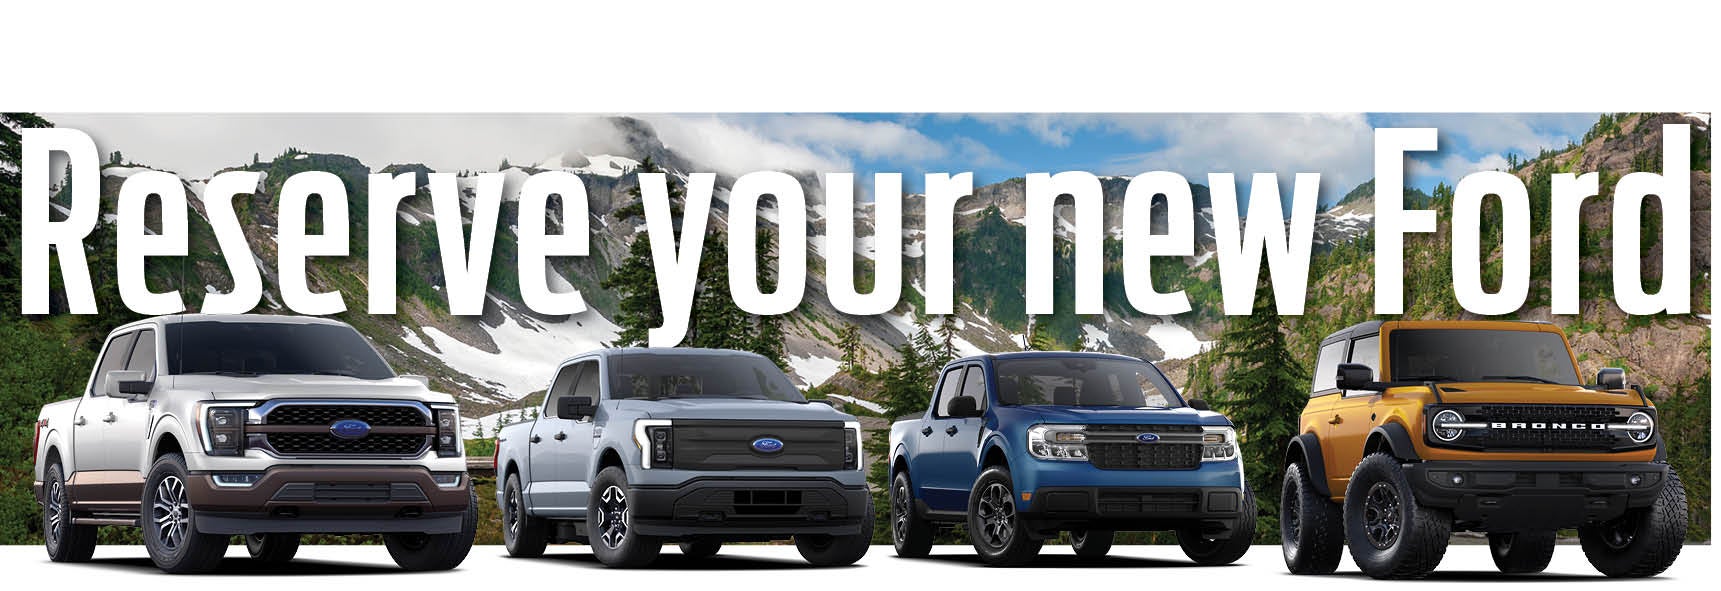 Reserve your new Ford